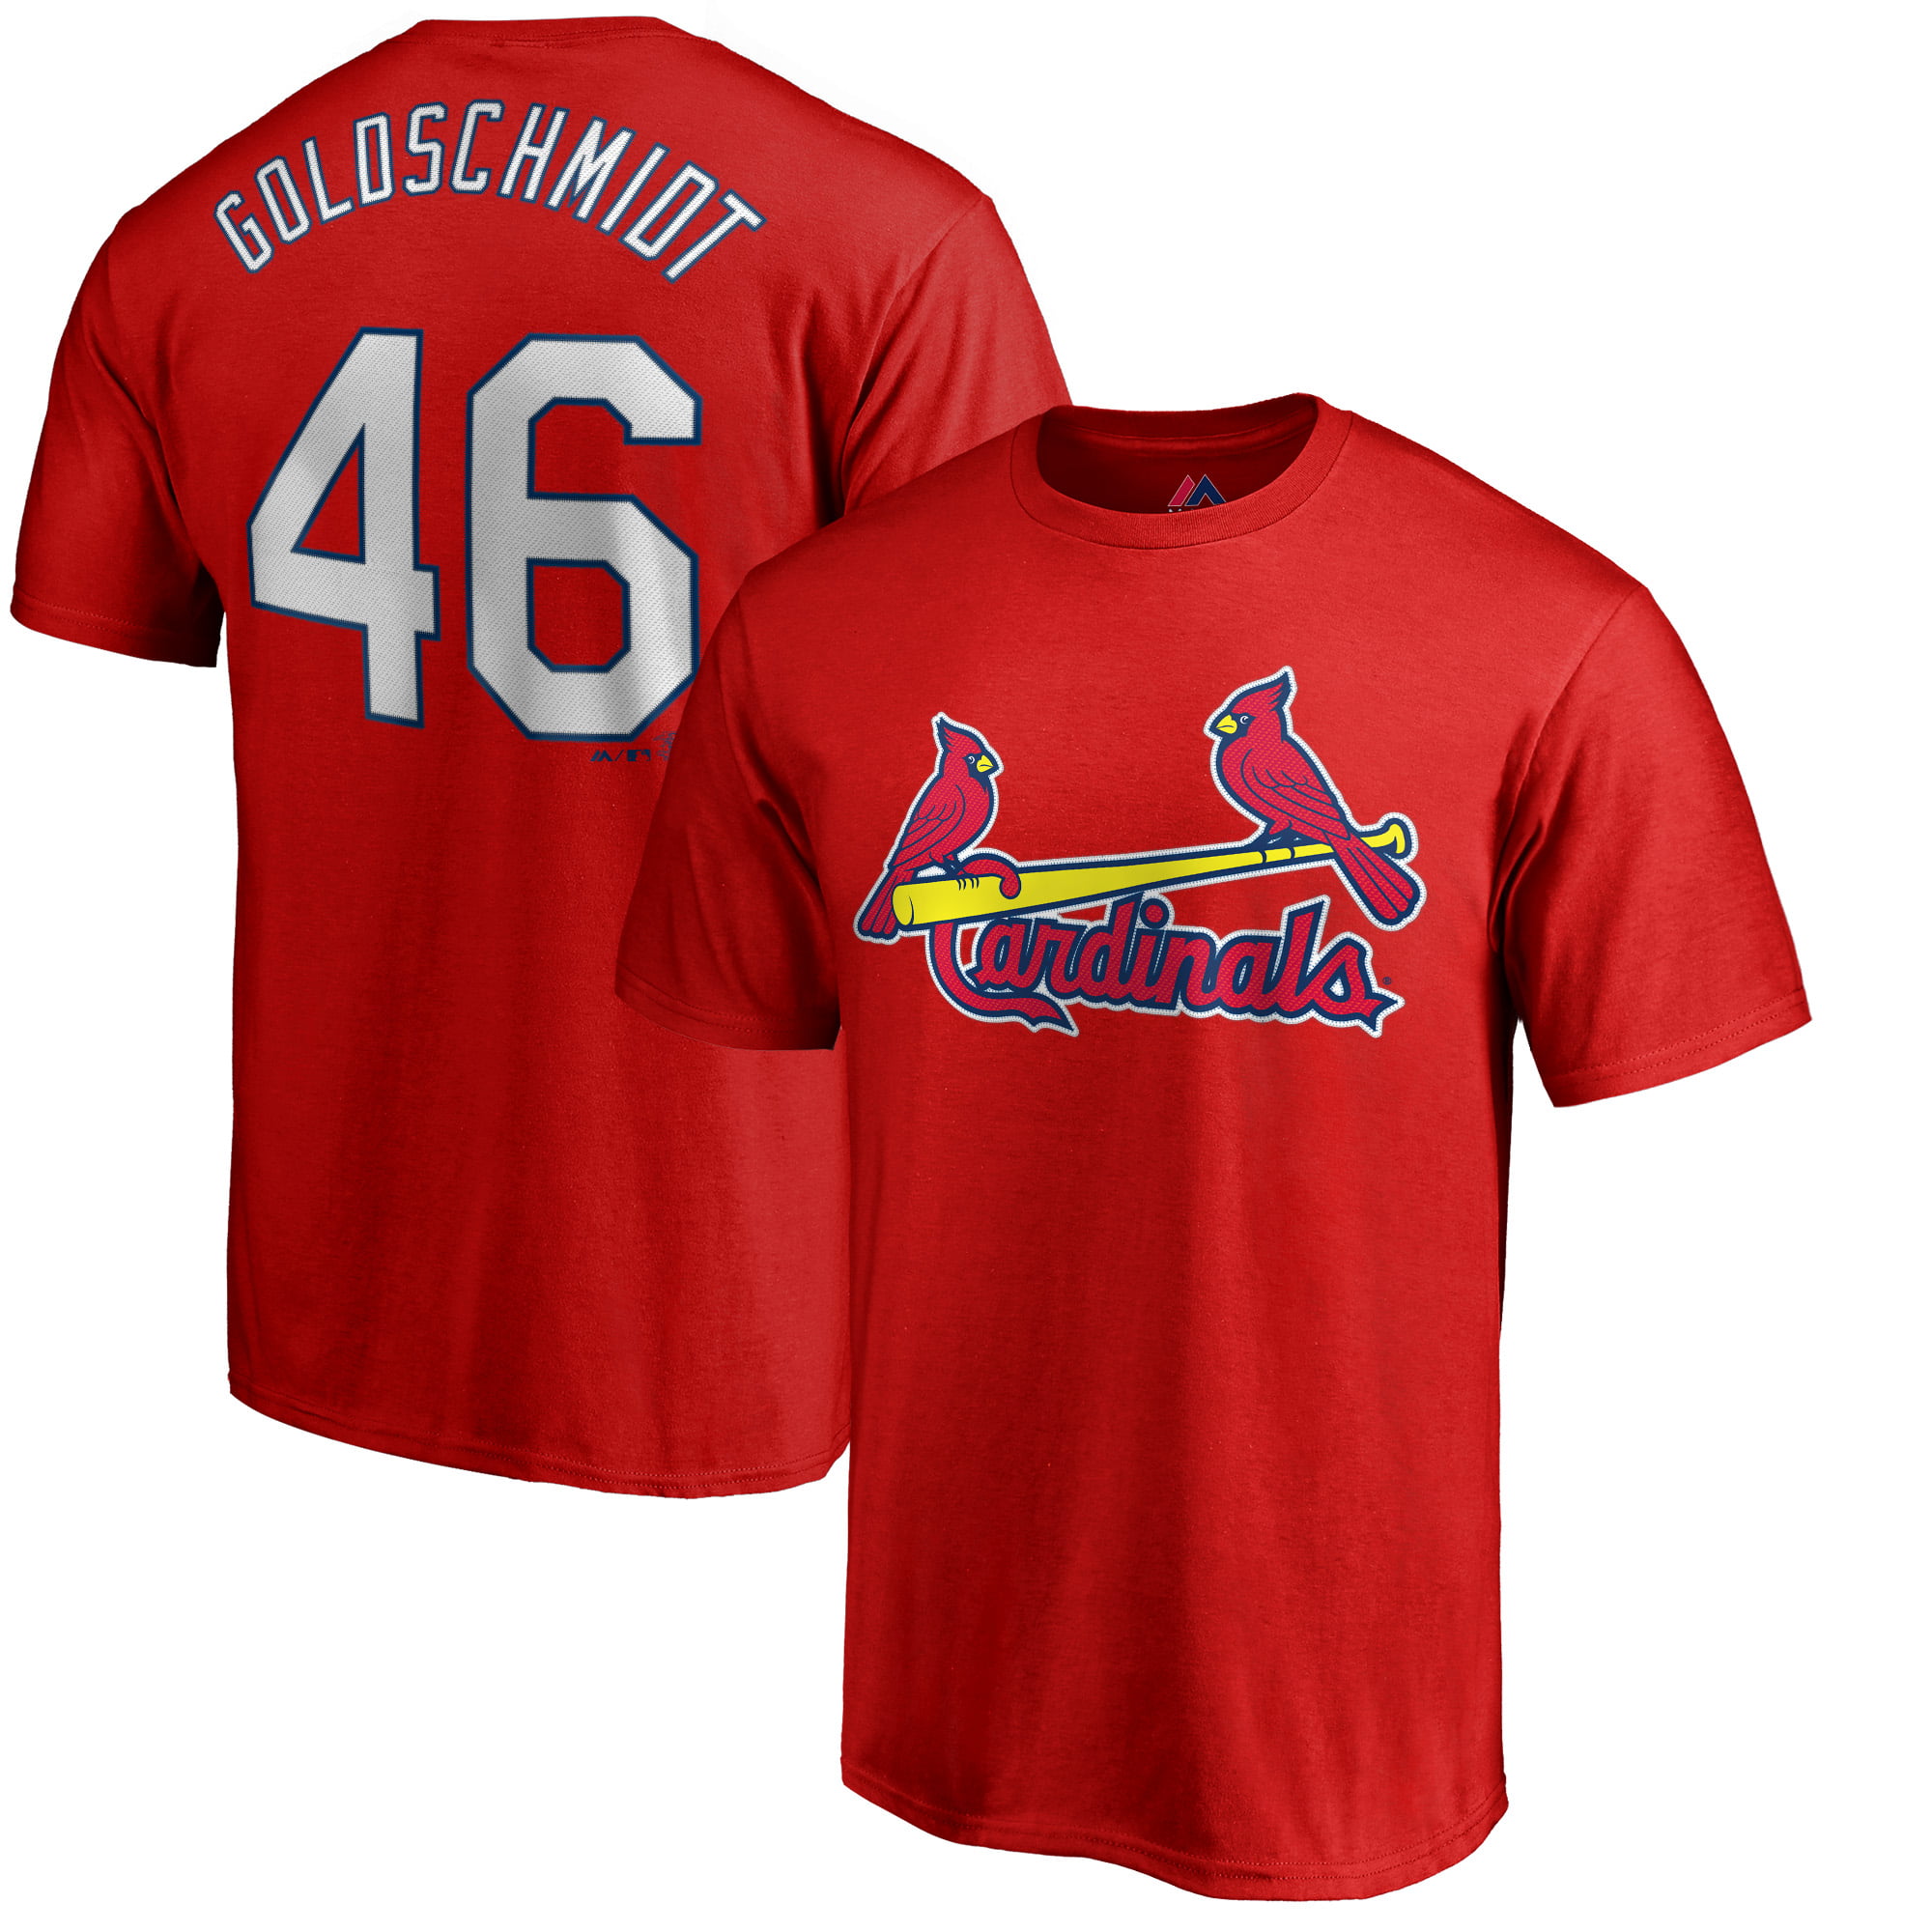 Paul Goldschmidt St. Louis Cardinals Majestic Official Name & Number T-Shirt - Red - 0 ...